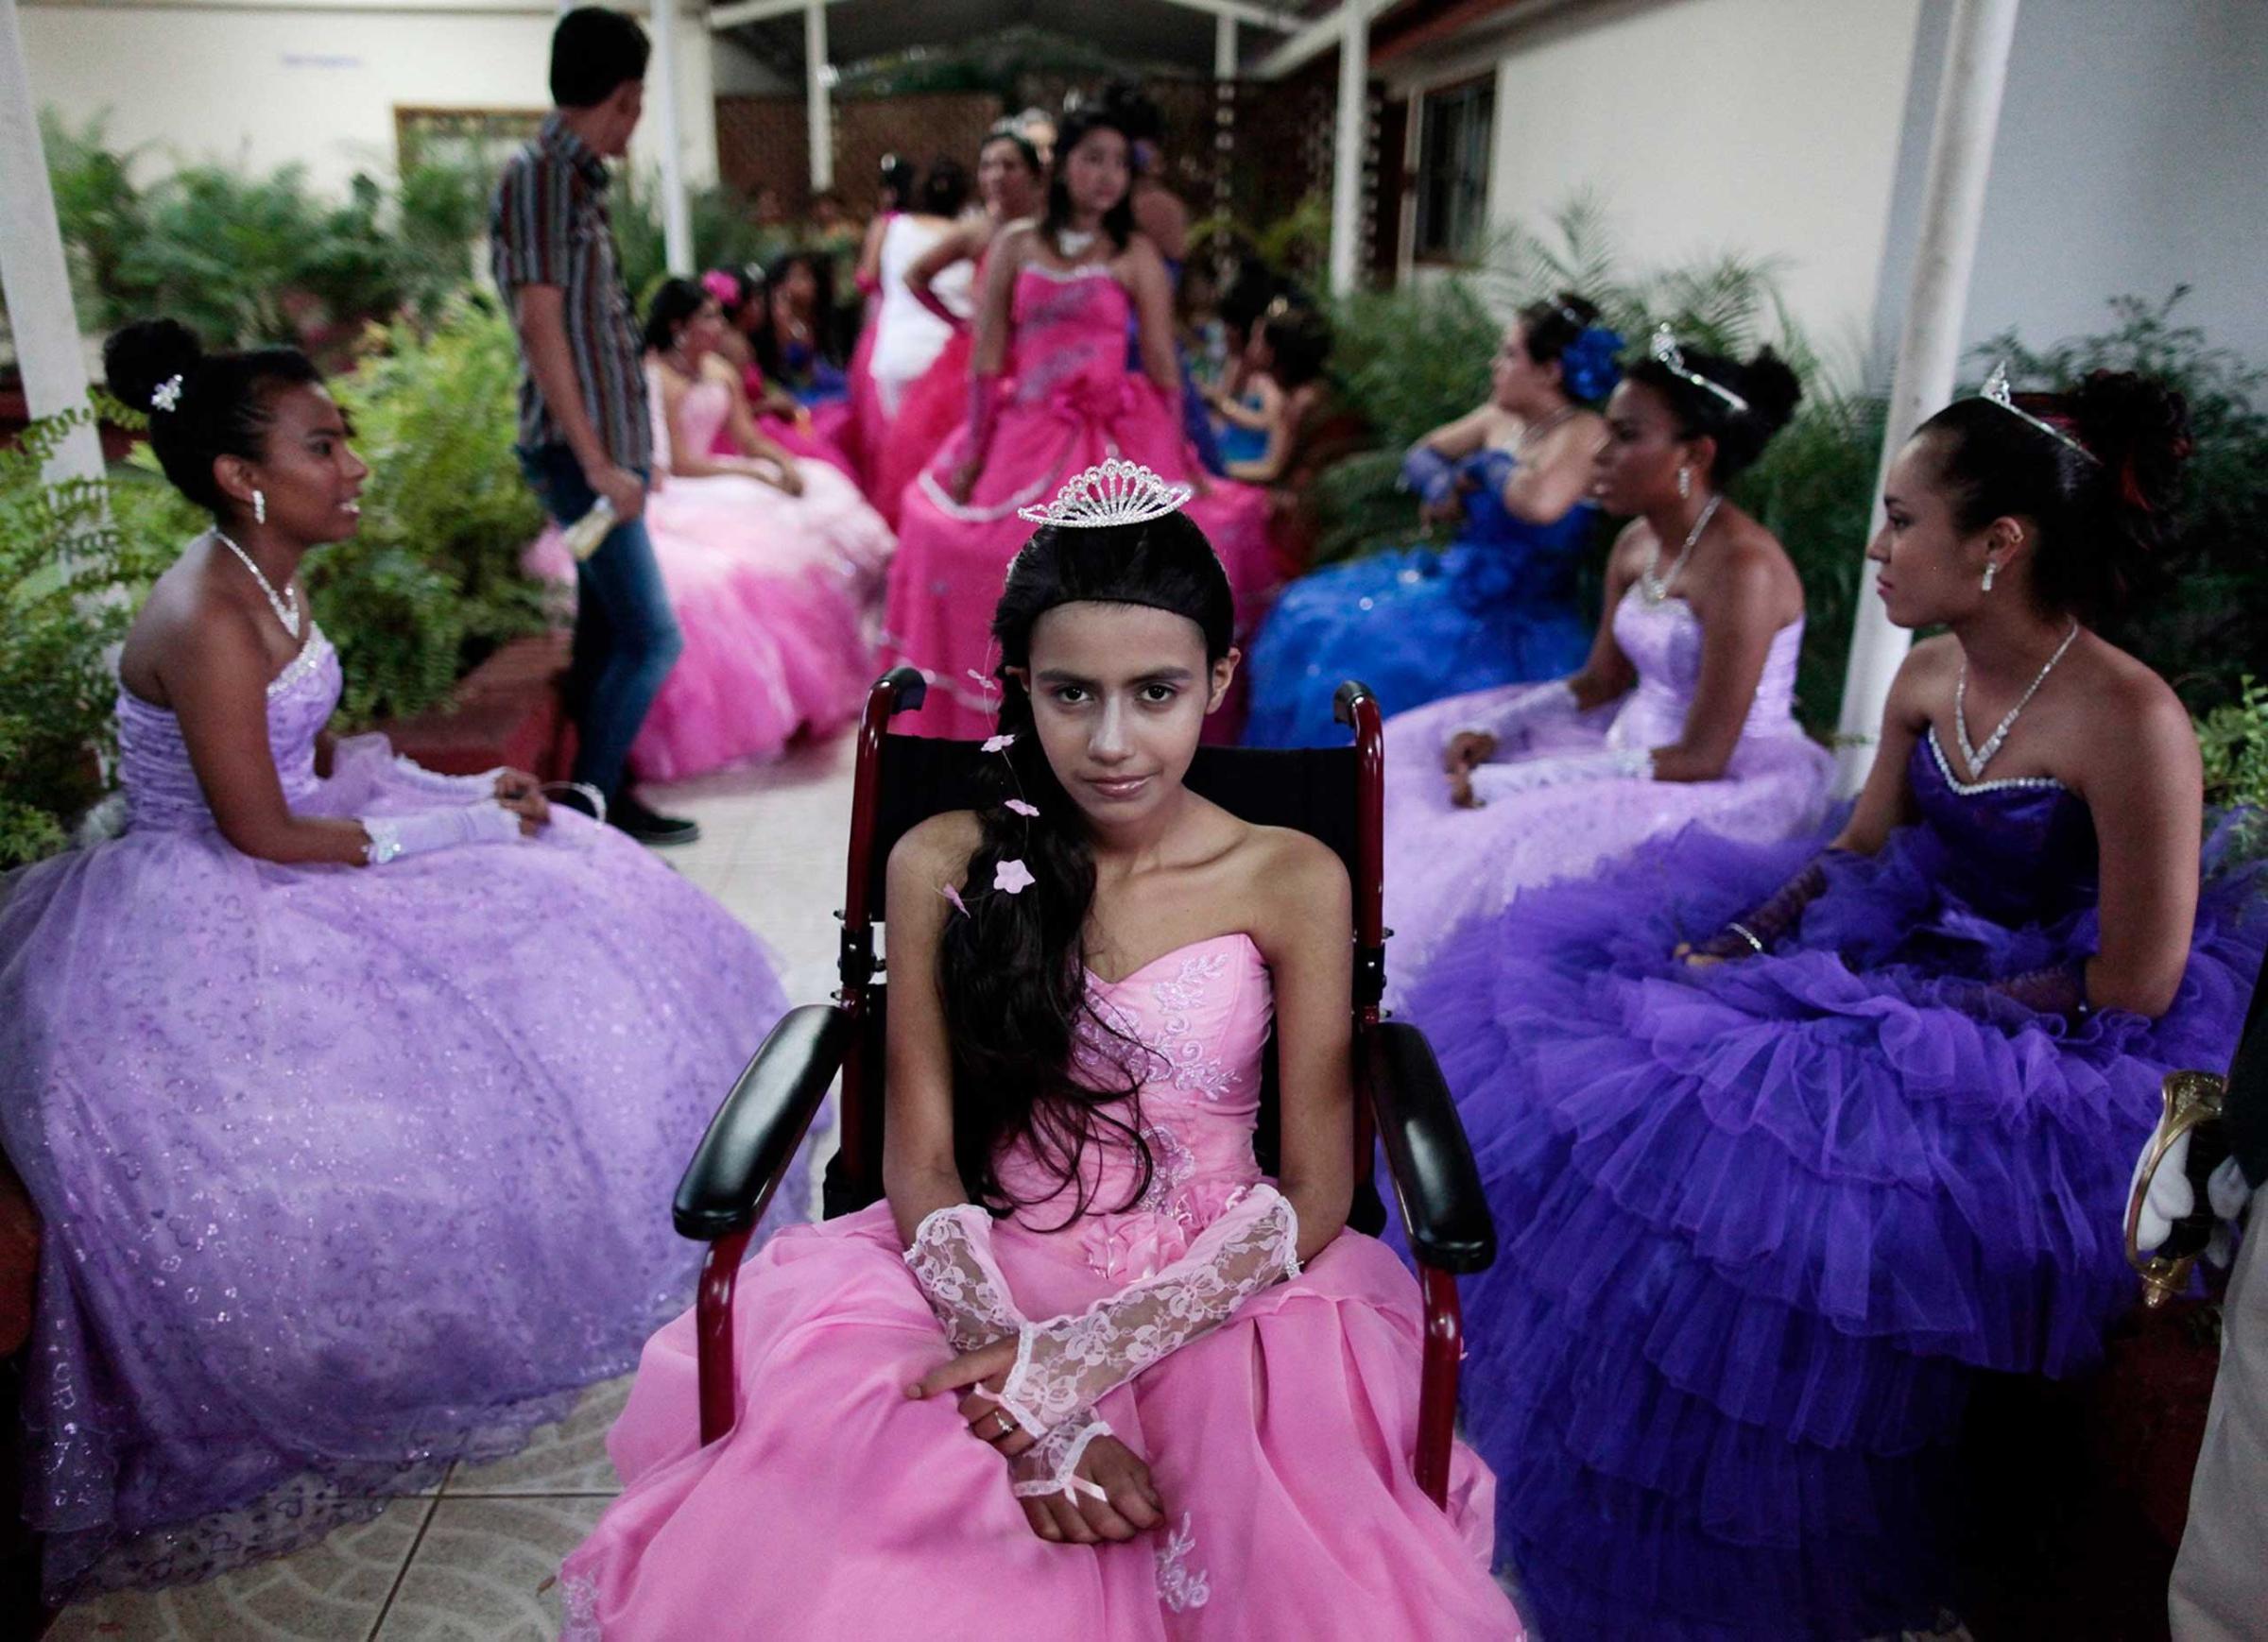 A cancer patient poses for a photo during her "Quinceanera" (15th birthday) party among other celebrants at a hotel in Managua